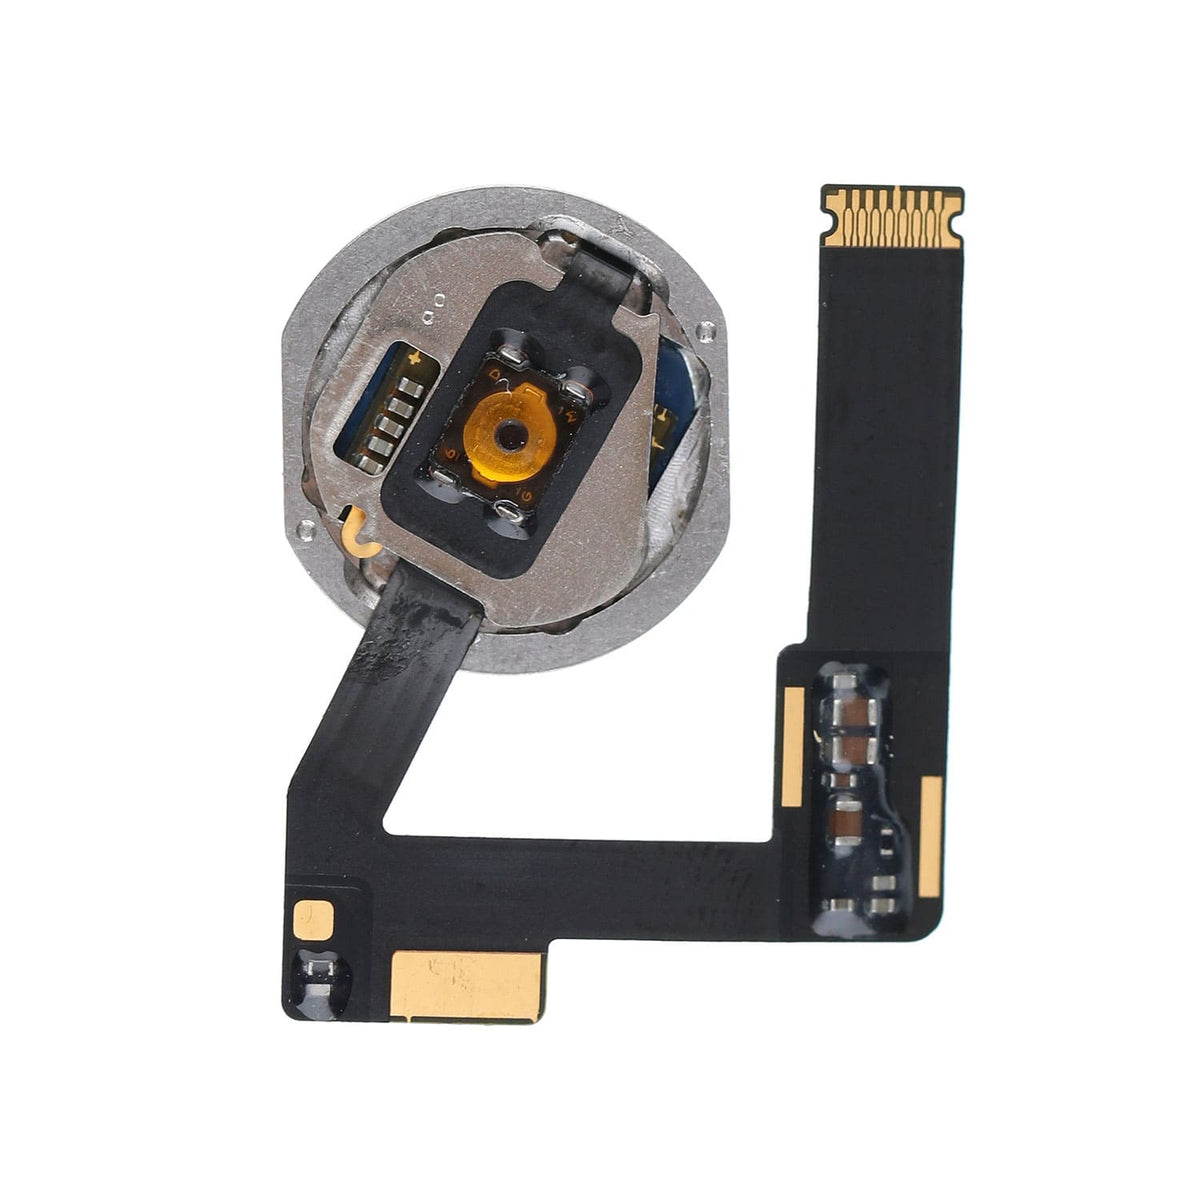 HOME BUTTON ASSEMBLY WITH FLEX CABLE RIBBON FOR IPAD AIR 3/ PRO 10.5" 1ST/12.9" 2ND GEN- ROSE GOLD